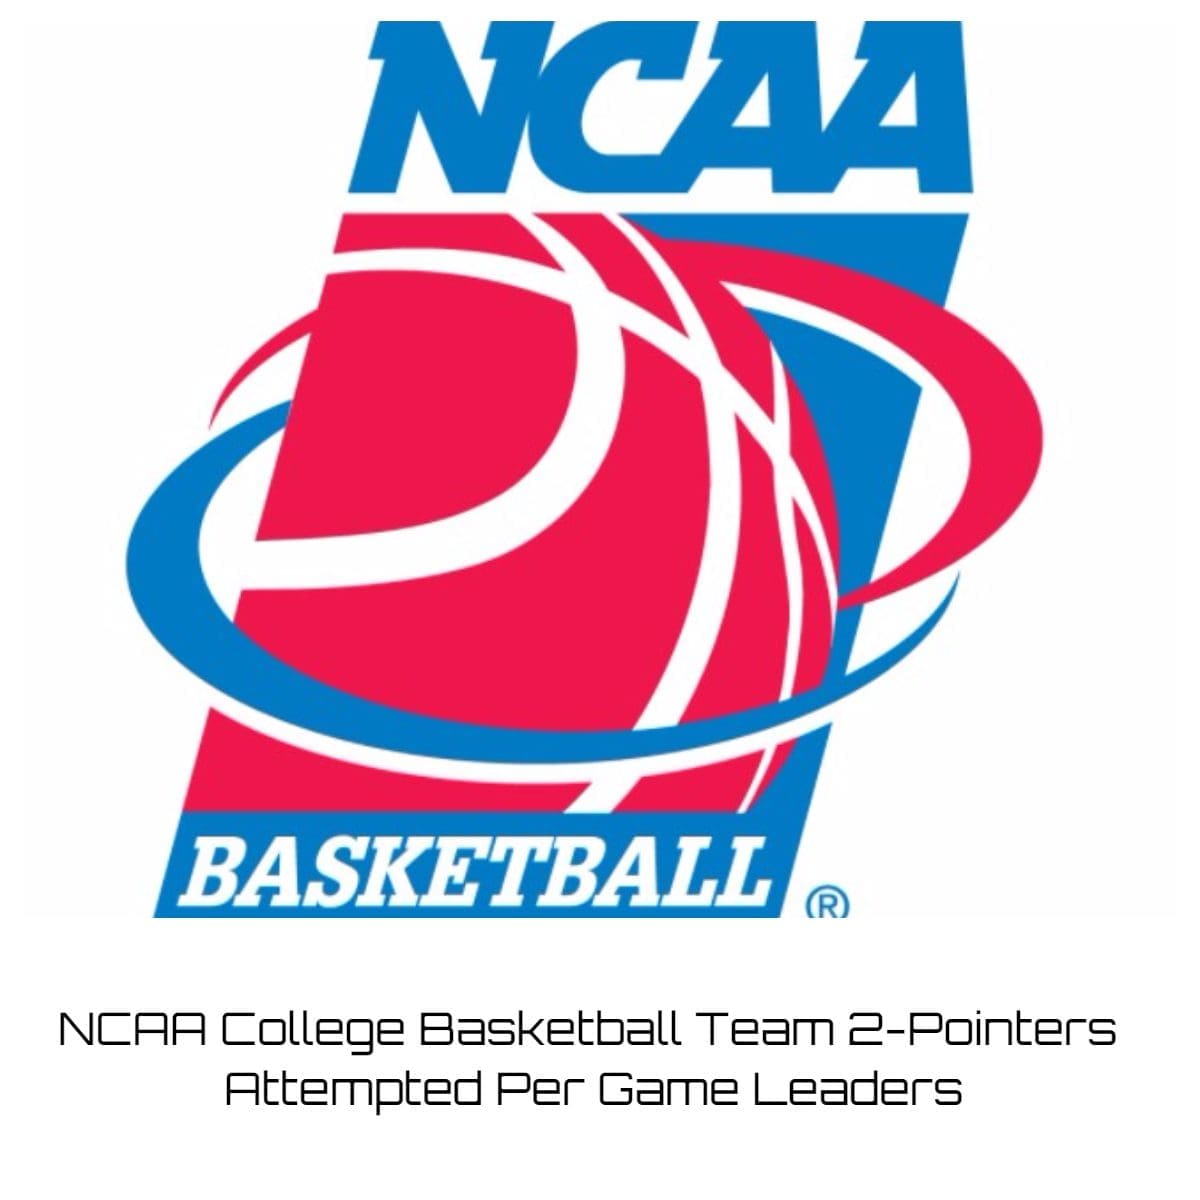 NCAA College Basketball Team 2-Pointers Attempted Per Game Leaders